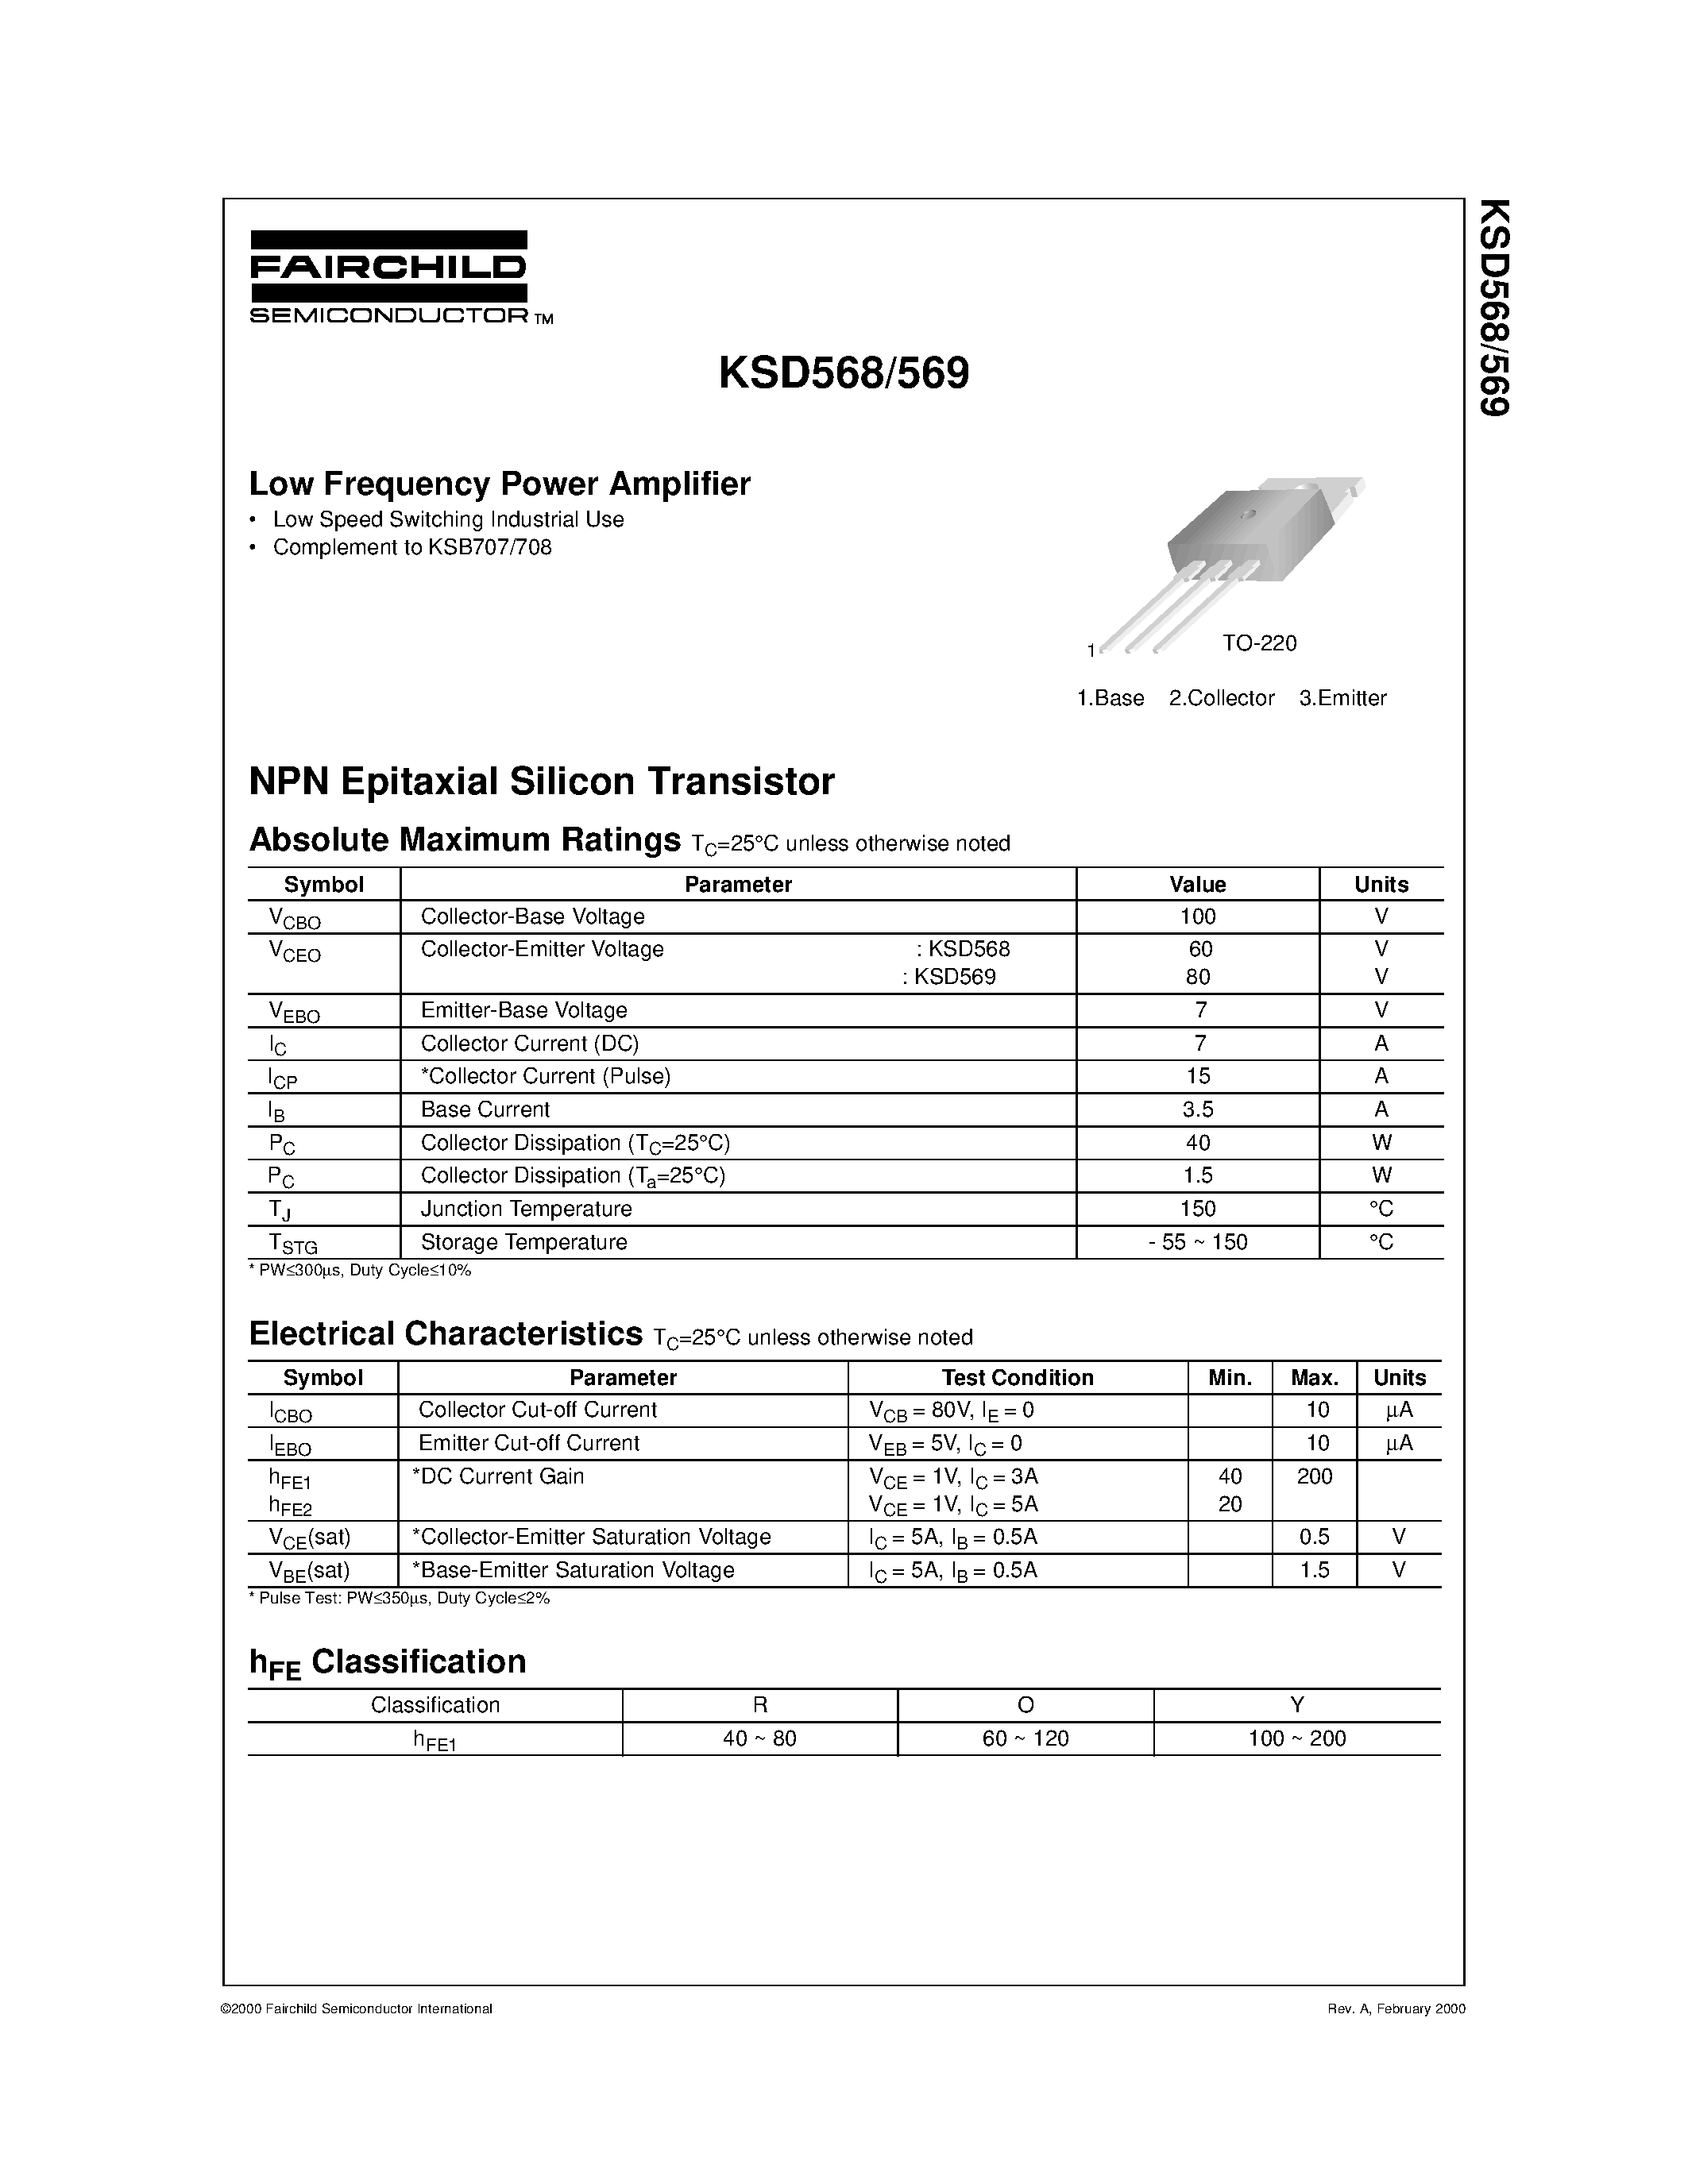 Datasheet KSD569 - Low Frequency Power Amplifier page 1